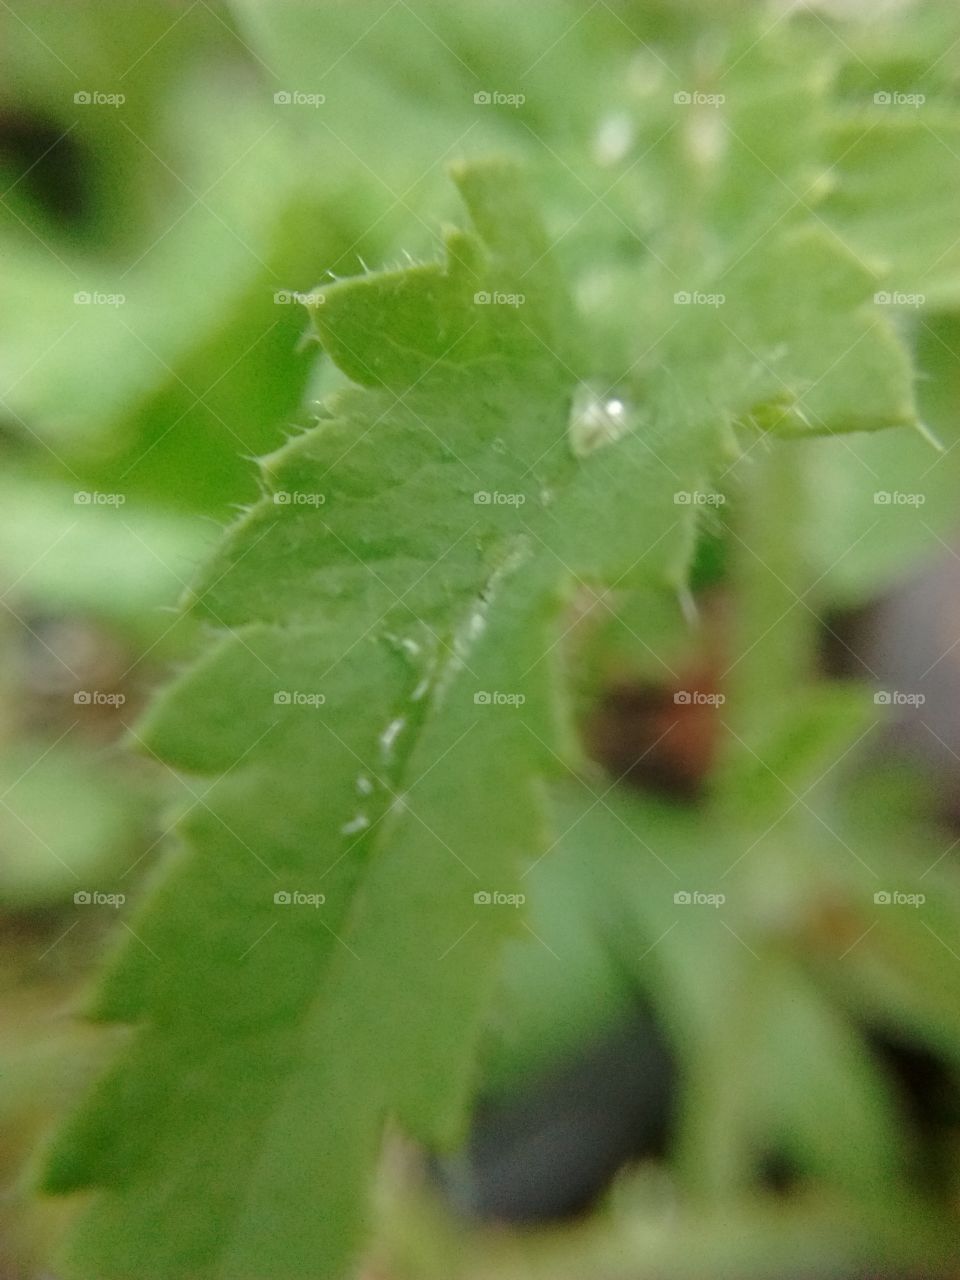 Fresh Raindrops on Thirsty Leaves